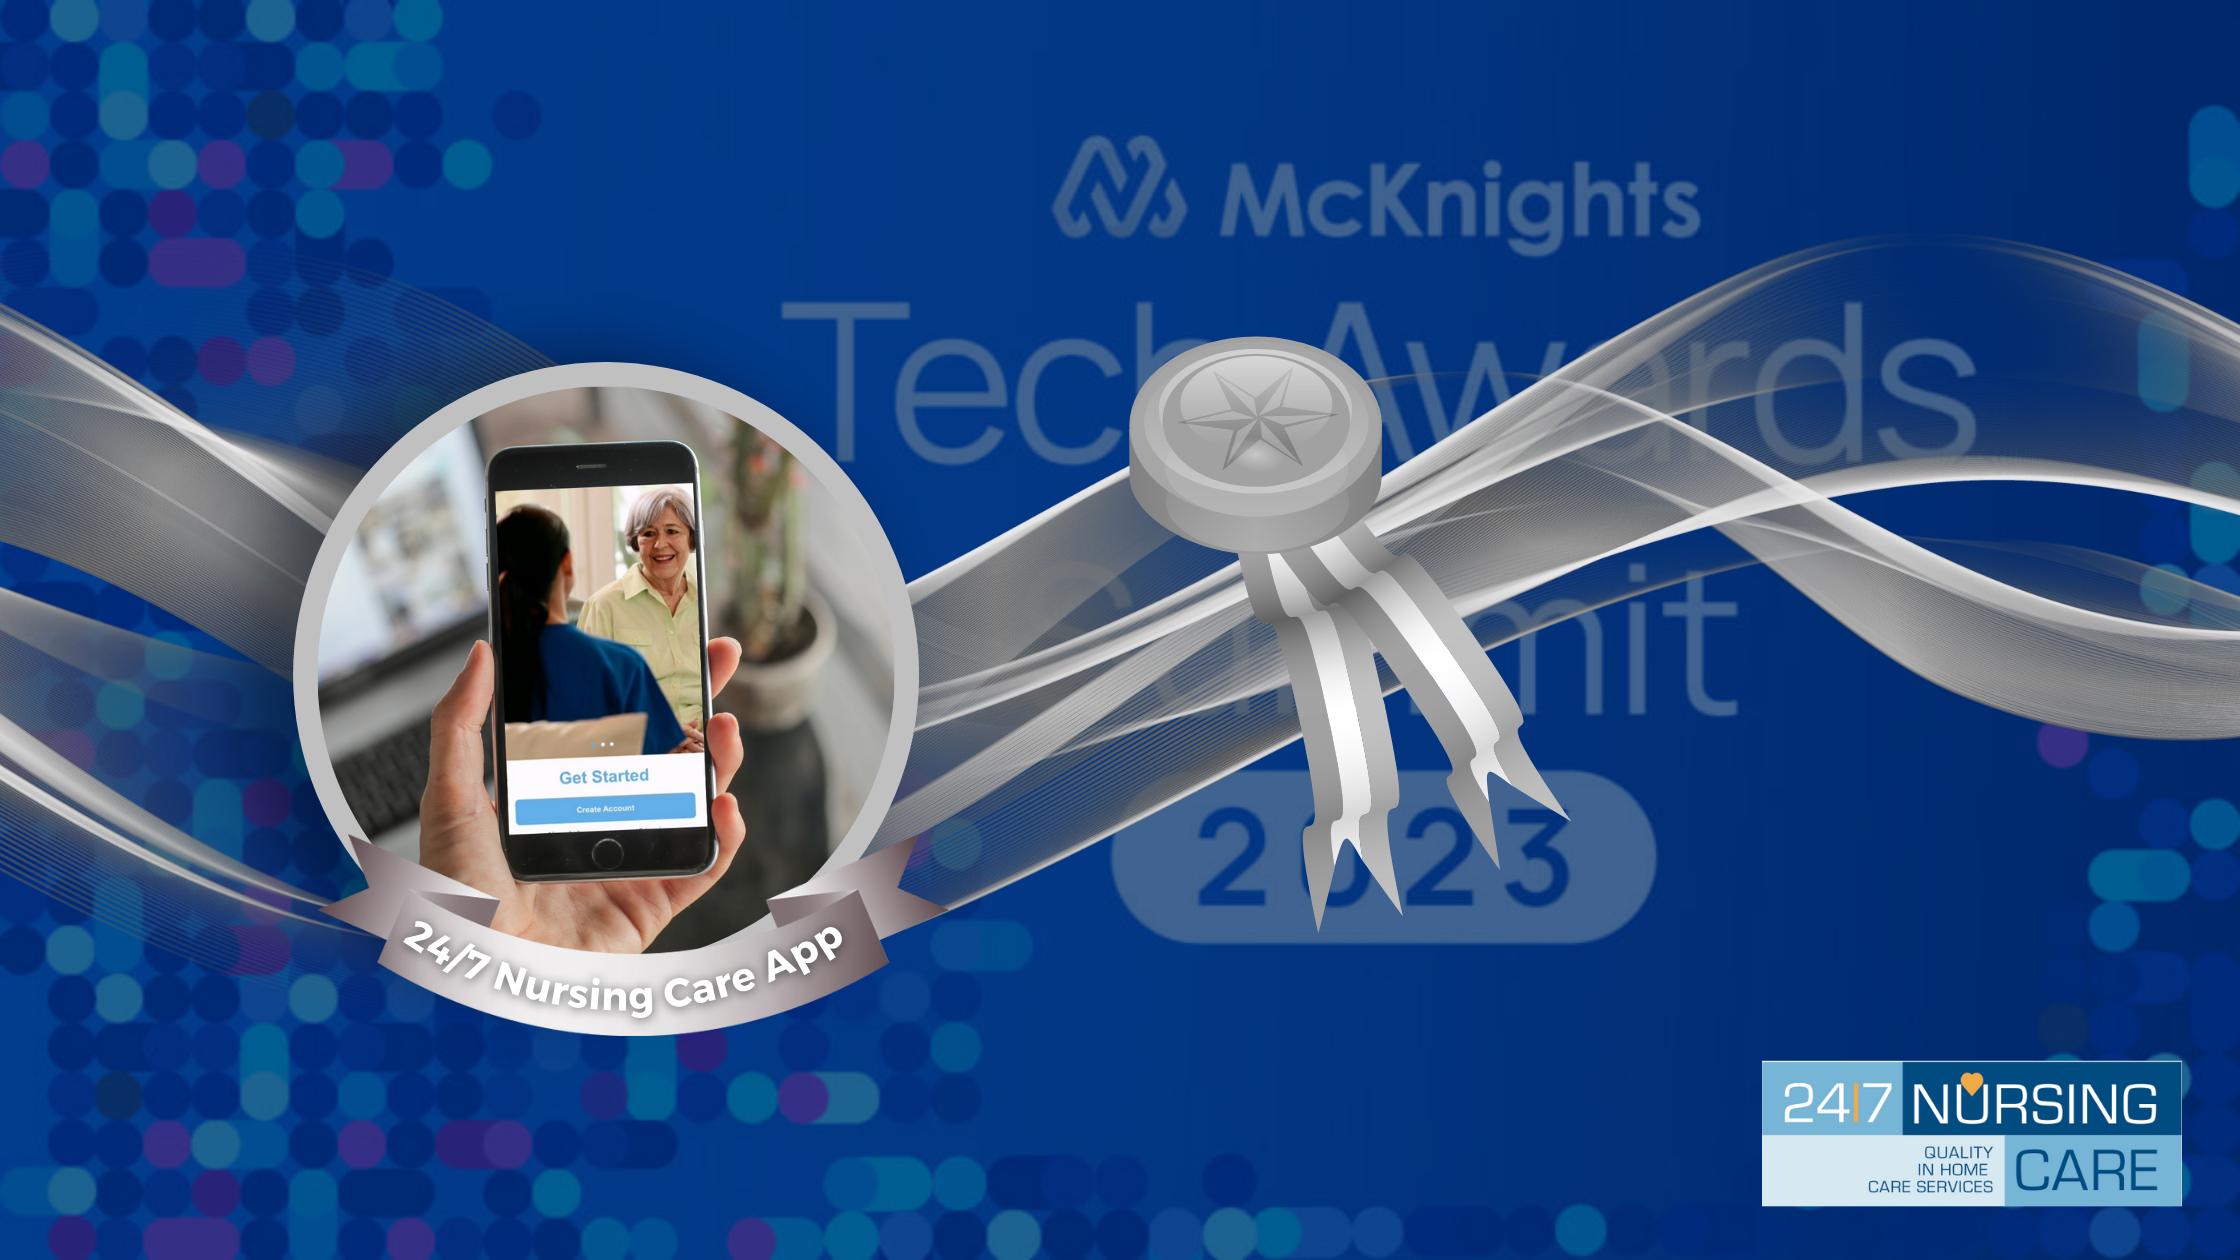 Celebrating Excellence In Quality Care: 24/7 Nursing Care App Wins Silver At The 13th Annual McKnight’s Tech Awards